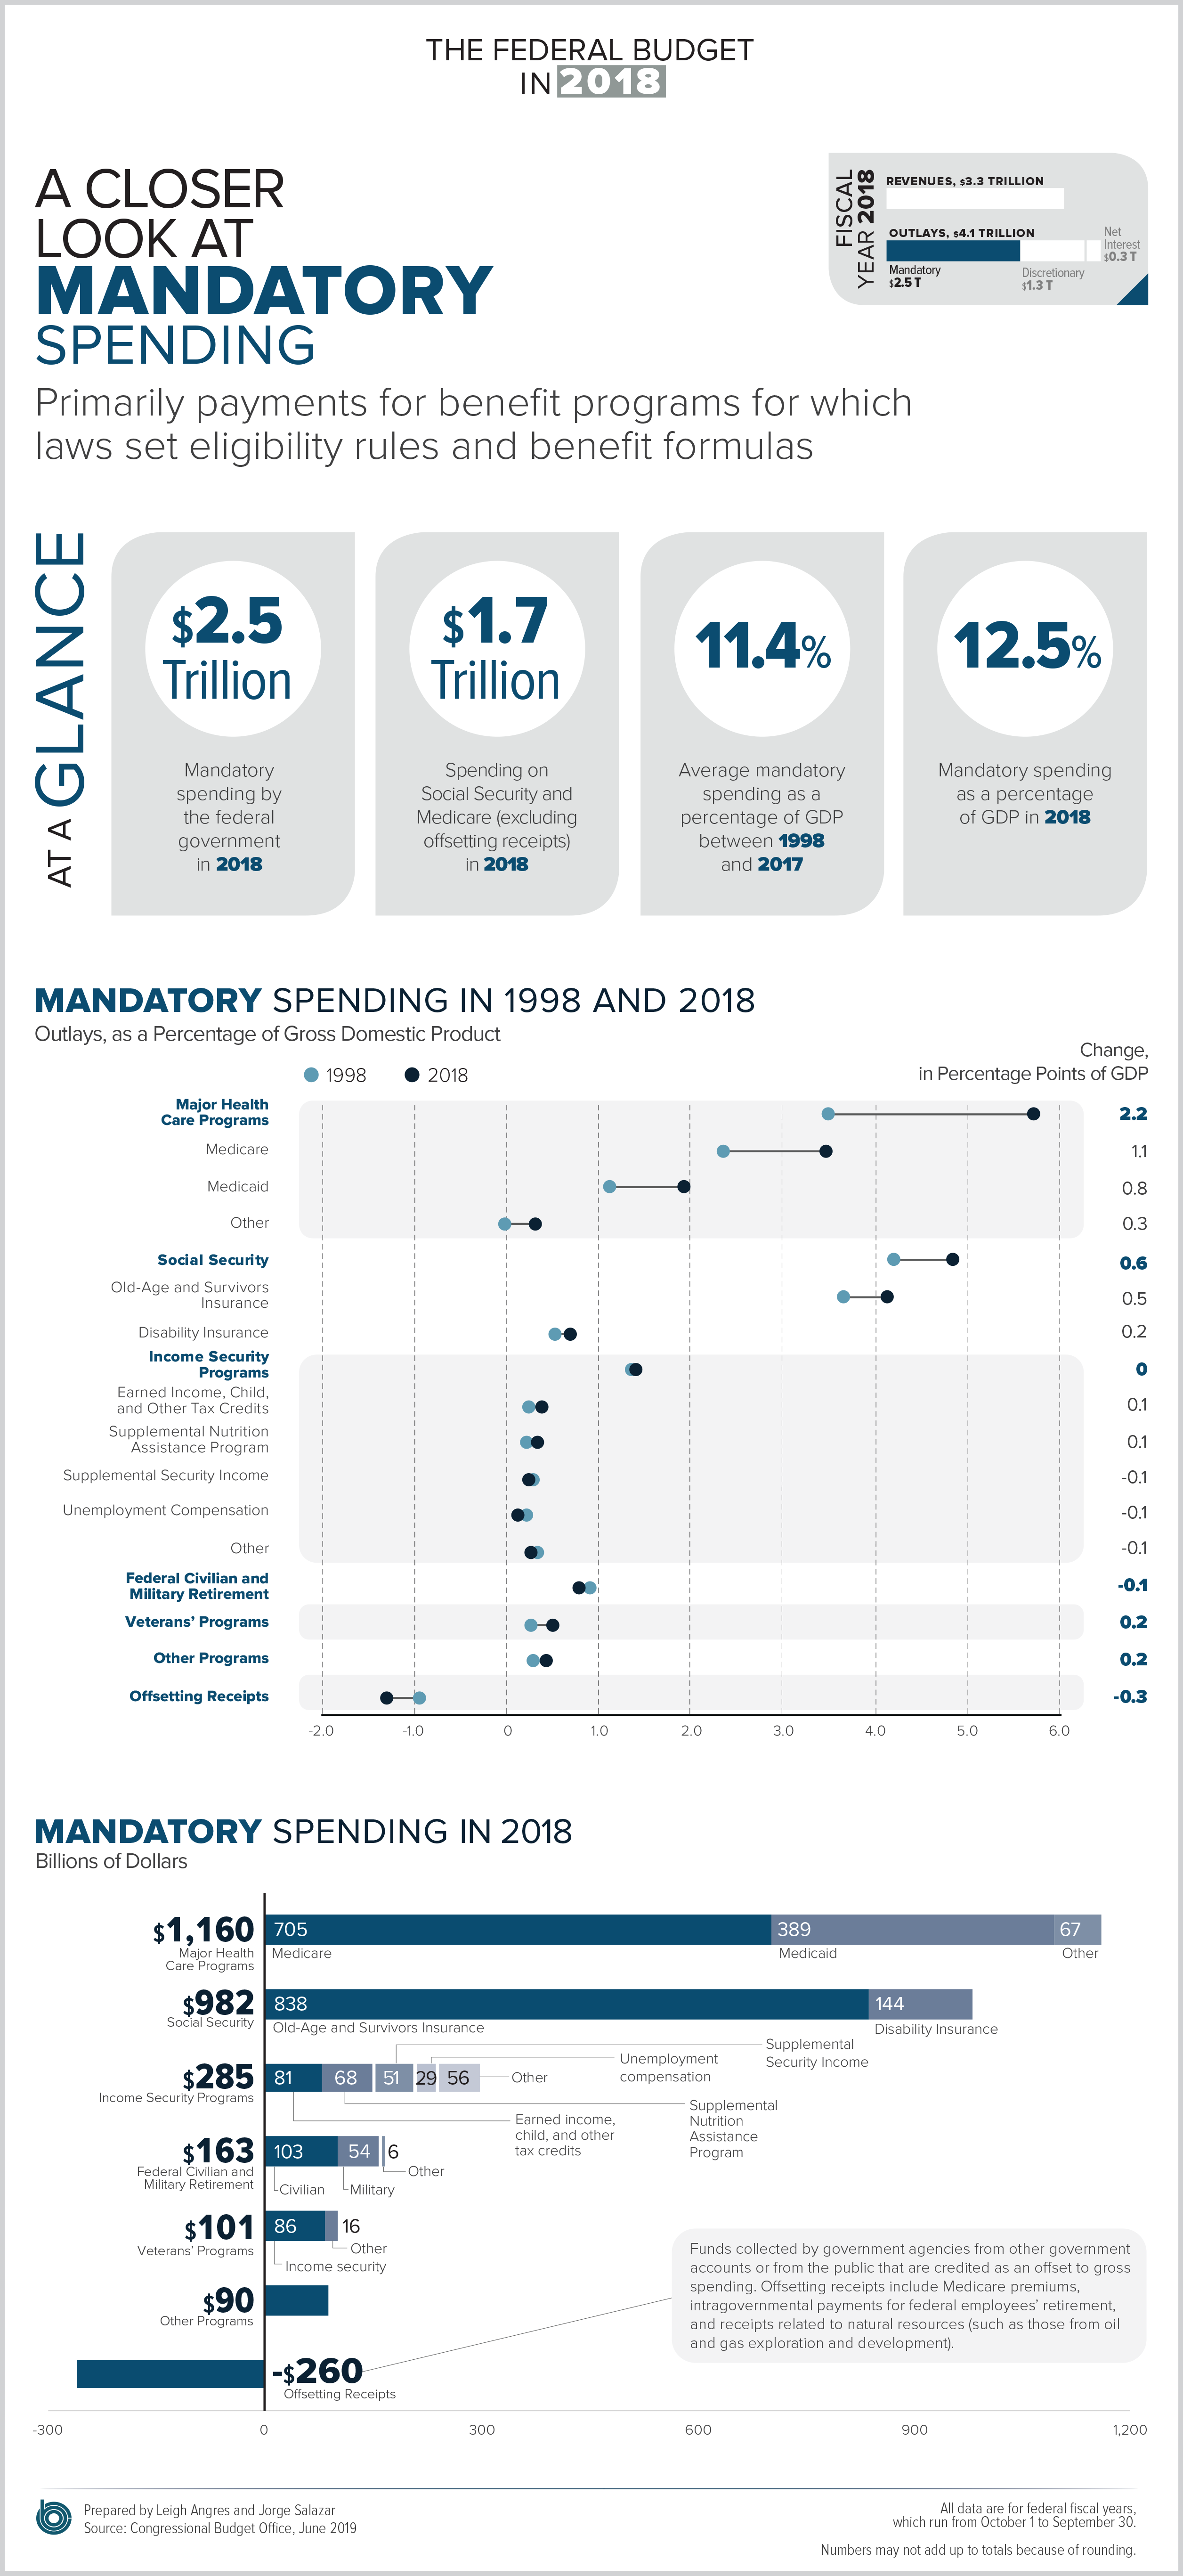 Mandatory Spending in 2018: An Infographic